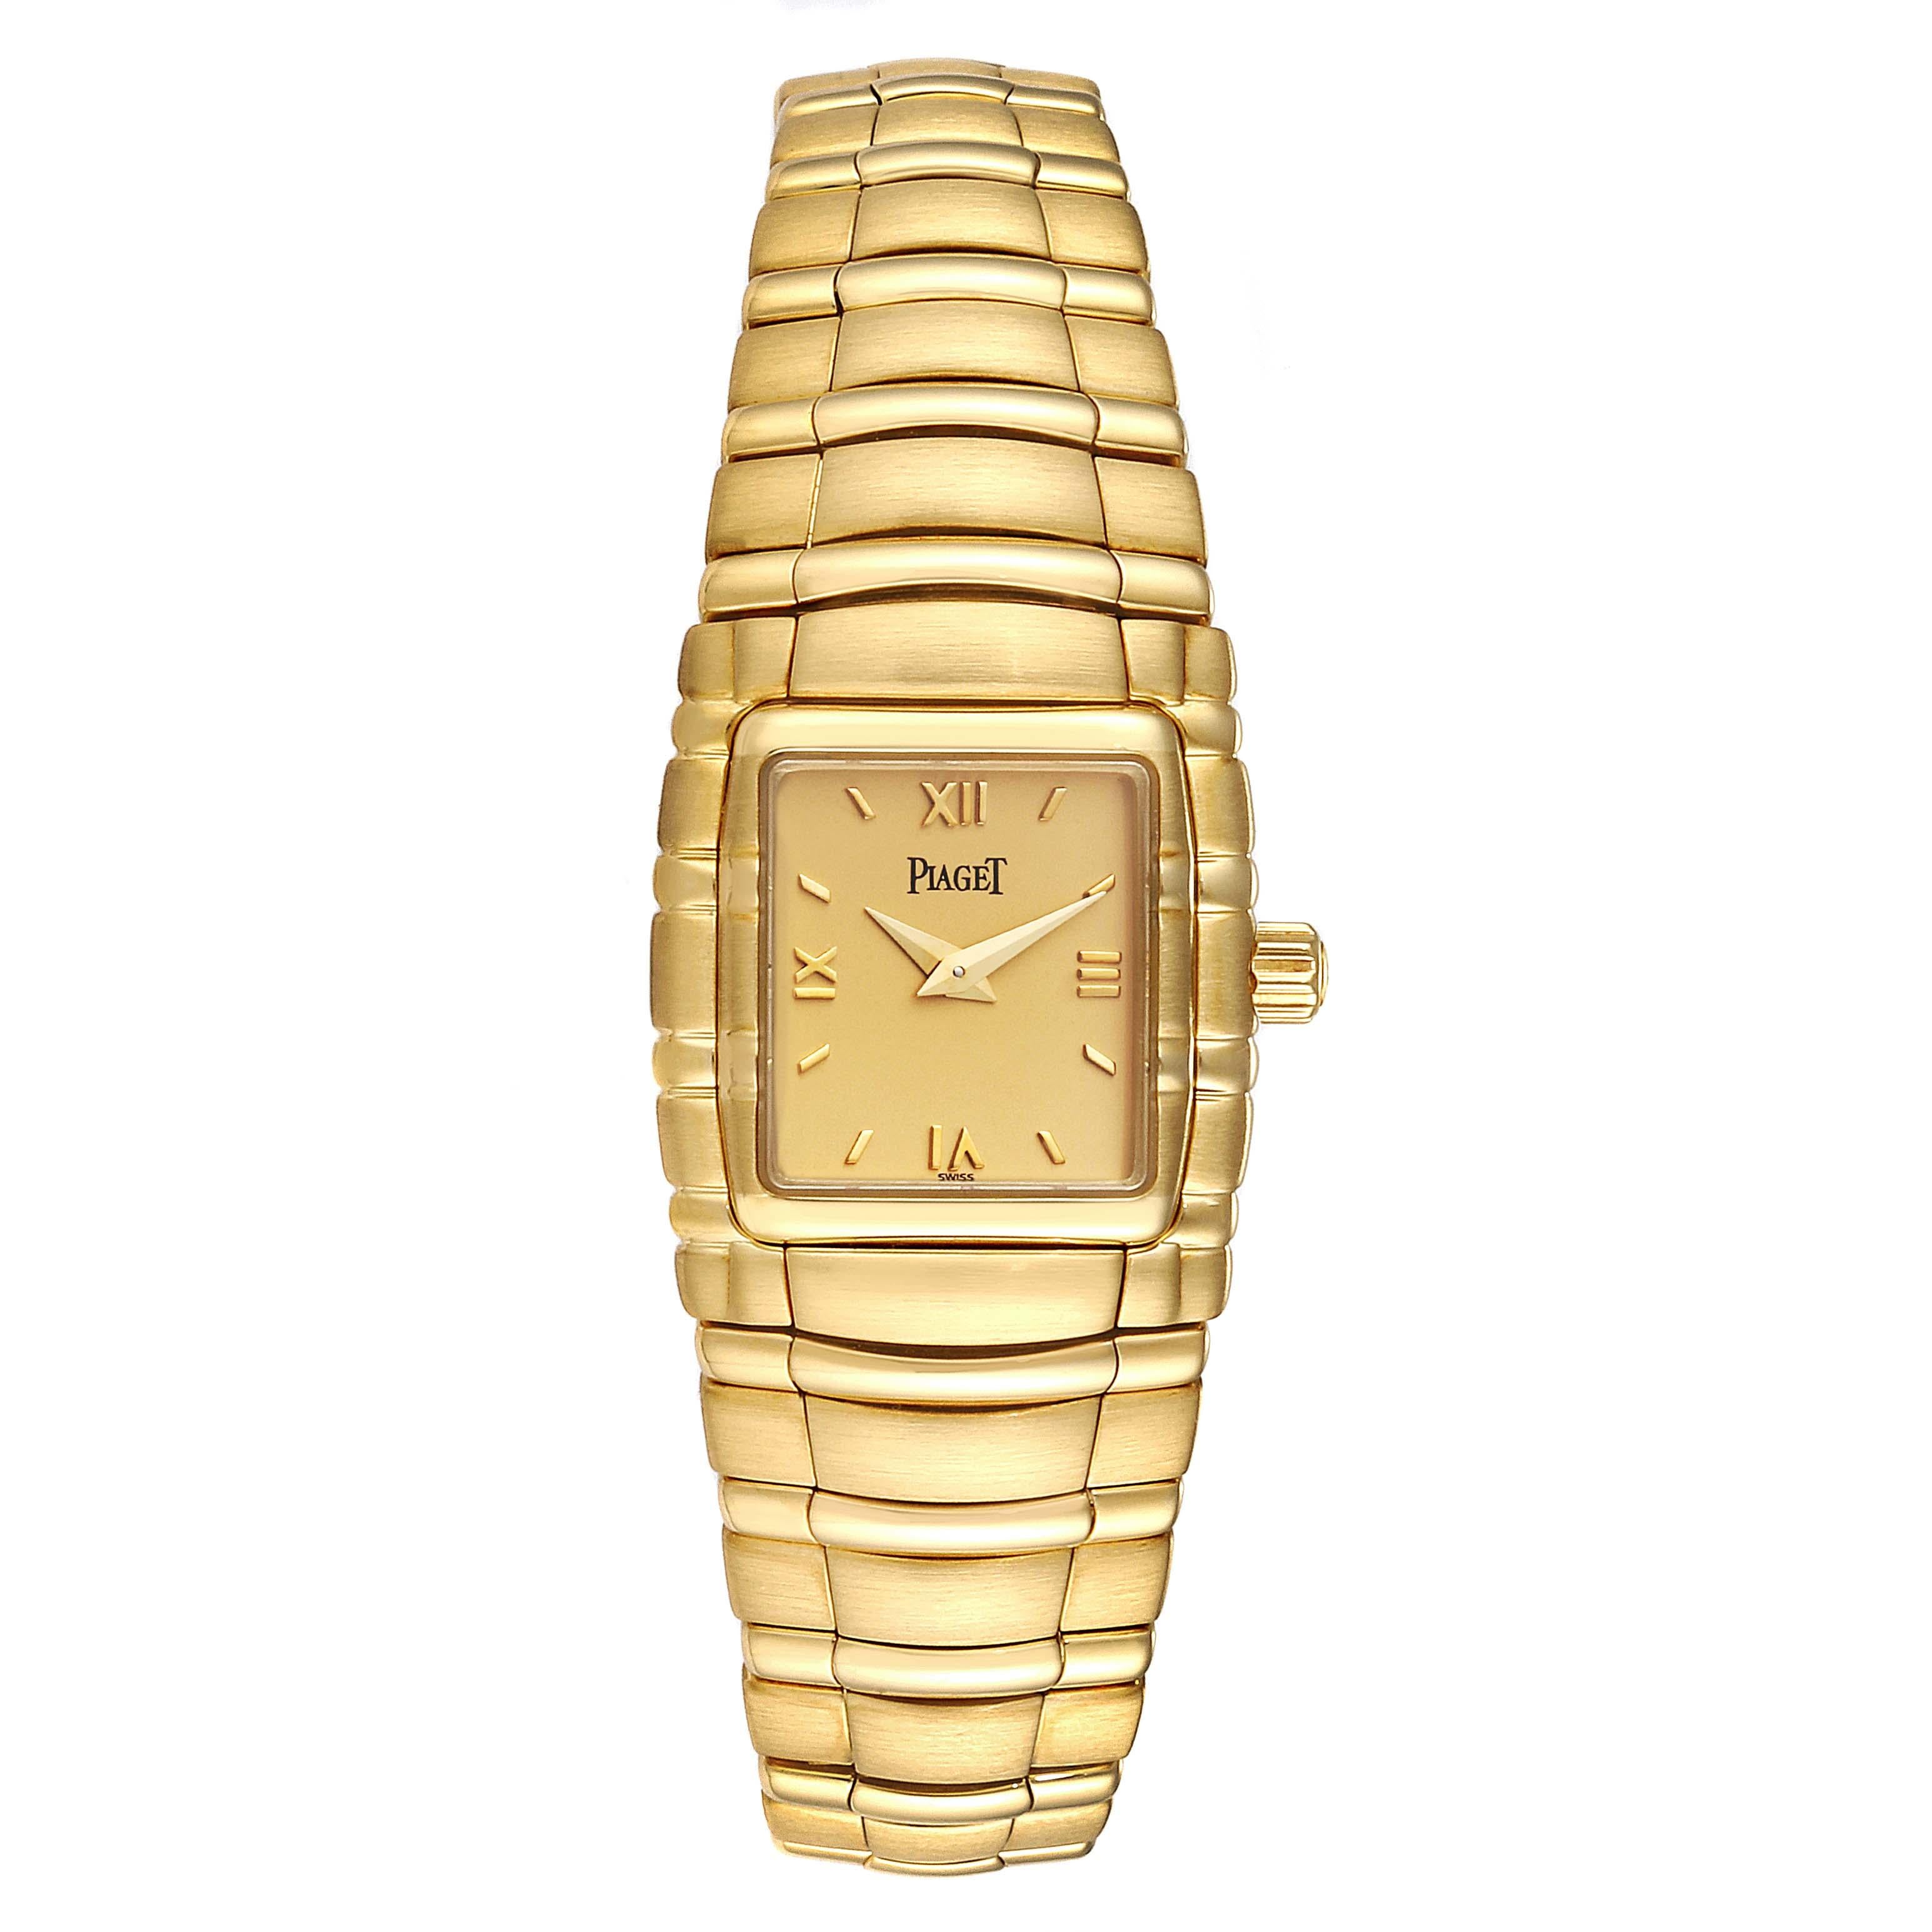 Piaget Tanagra 18K Yellow Gold Mechanical Ladies Watch M411. Manual-winding movement. Brushed and polished 18k yellow gold touneau case 24.7 x 21.0 mm. 18K yellow gold ribbed bezel. Scratch resistant sapphire crystal. Champagne dial with roman